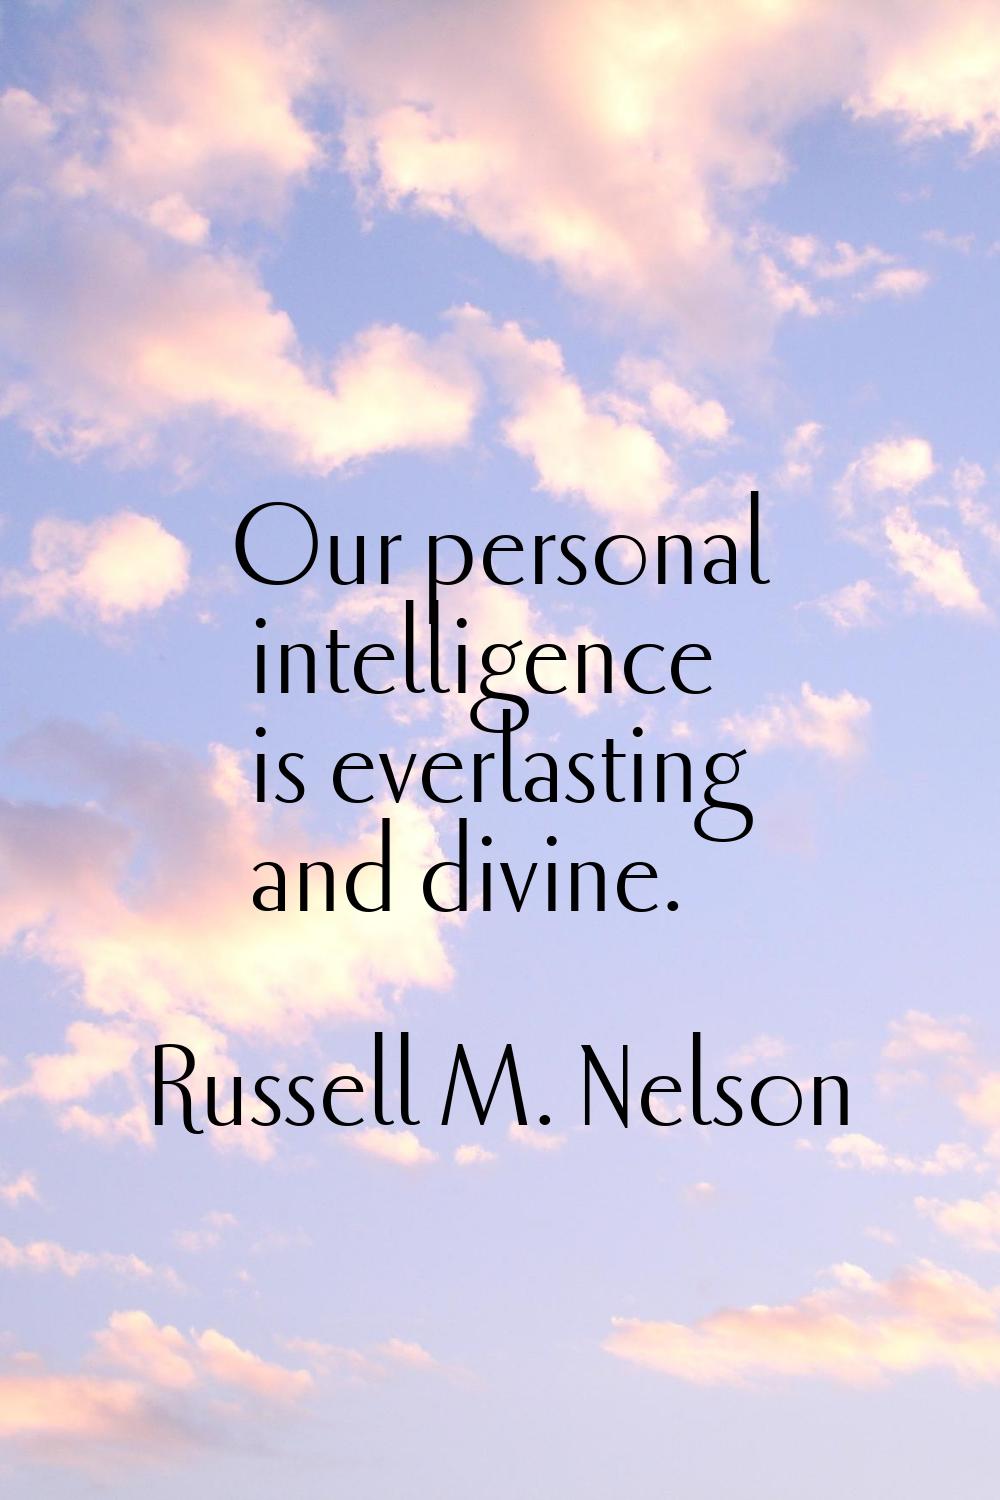 Our personal intelligence is everlasting and divine.